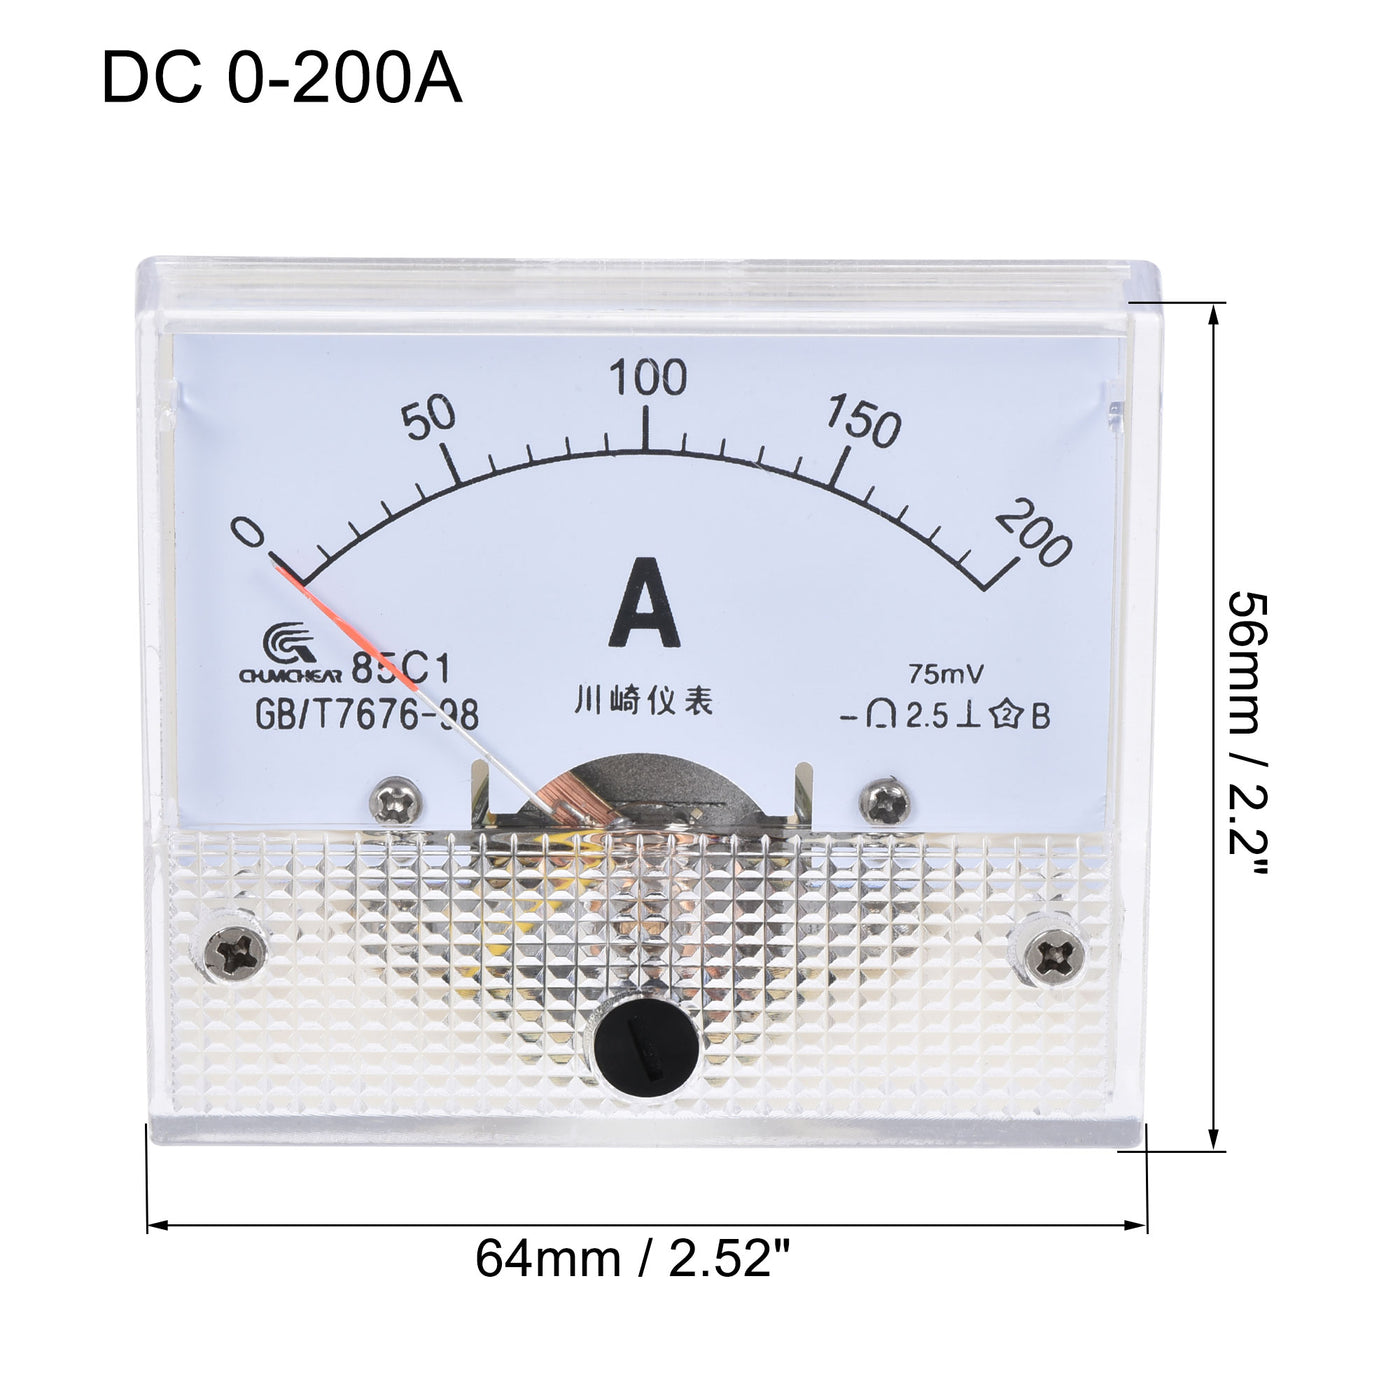 uxcell Uxcell Analog Current Panel Meter DC 0-200A 85C1 with 75mV Shunt for Circuit Testing Ampere Tester Gauge, 1 Set